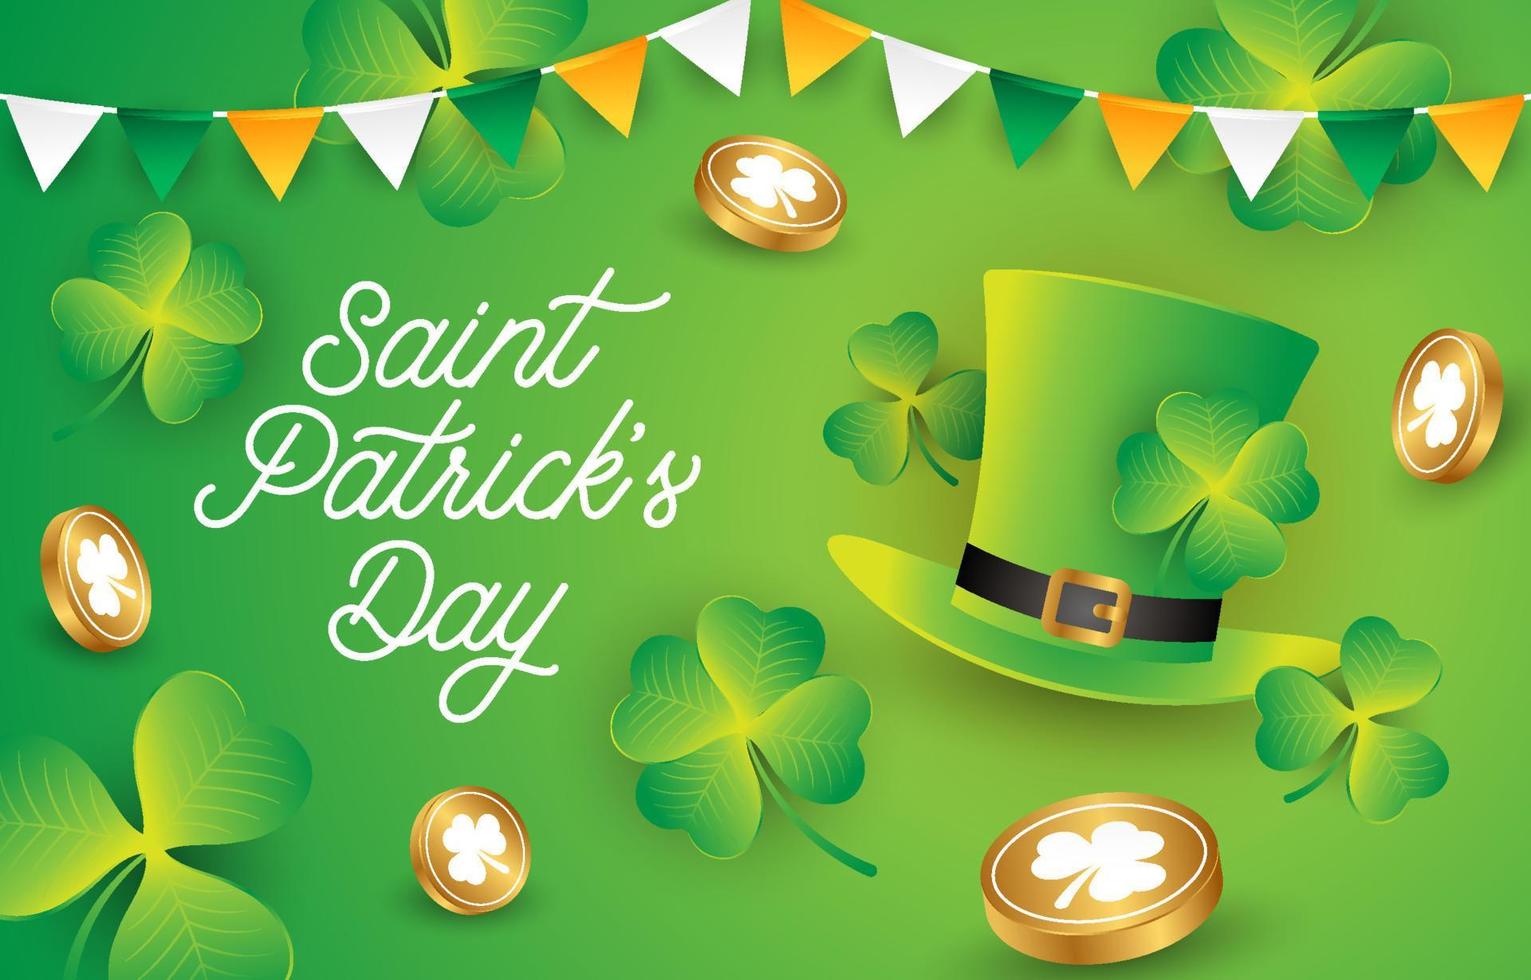 Saint Patricks's Day with Hat and Clover vector